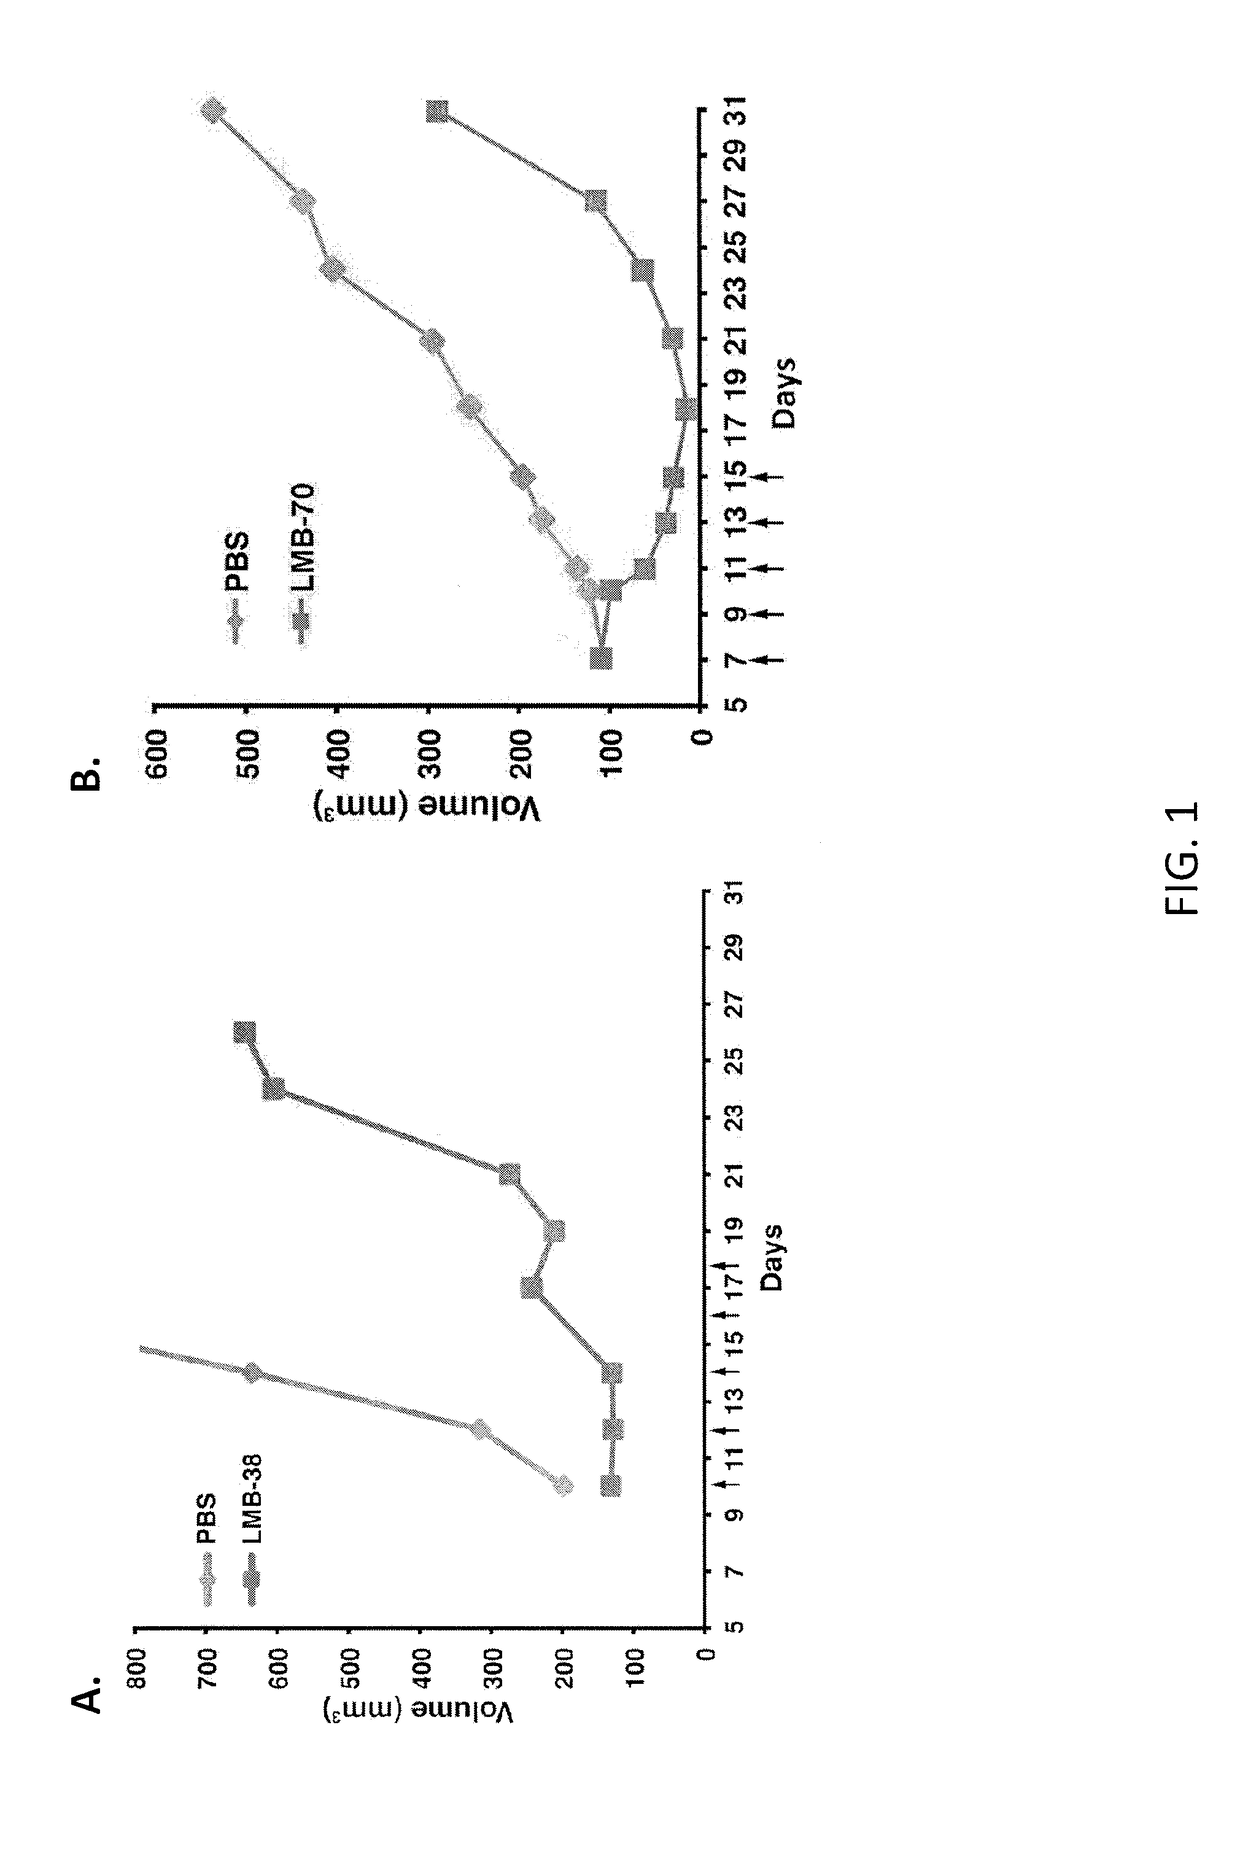 Anti-bcma polypeptides and proteins